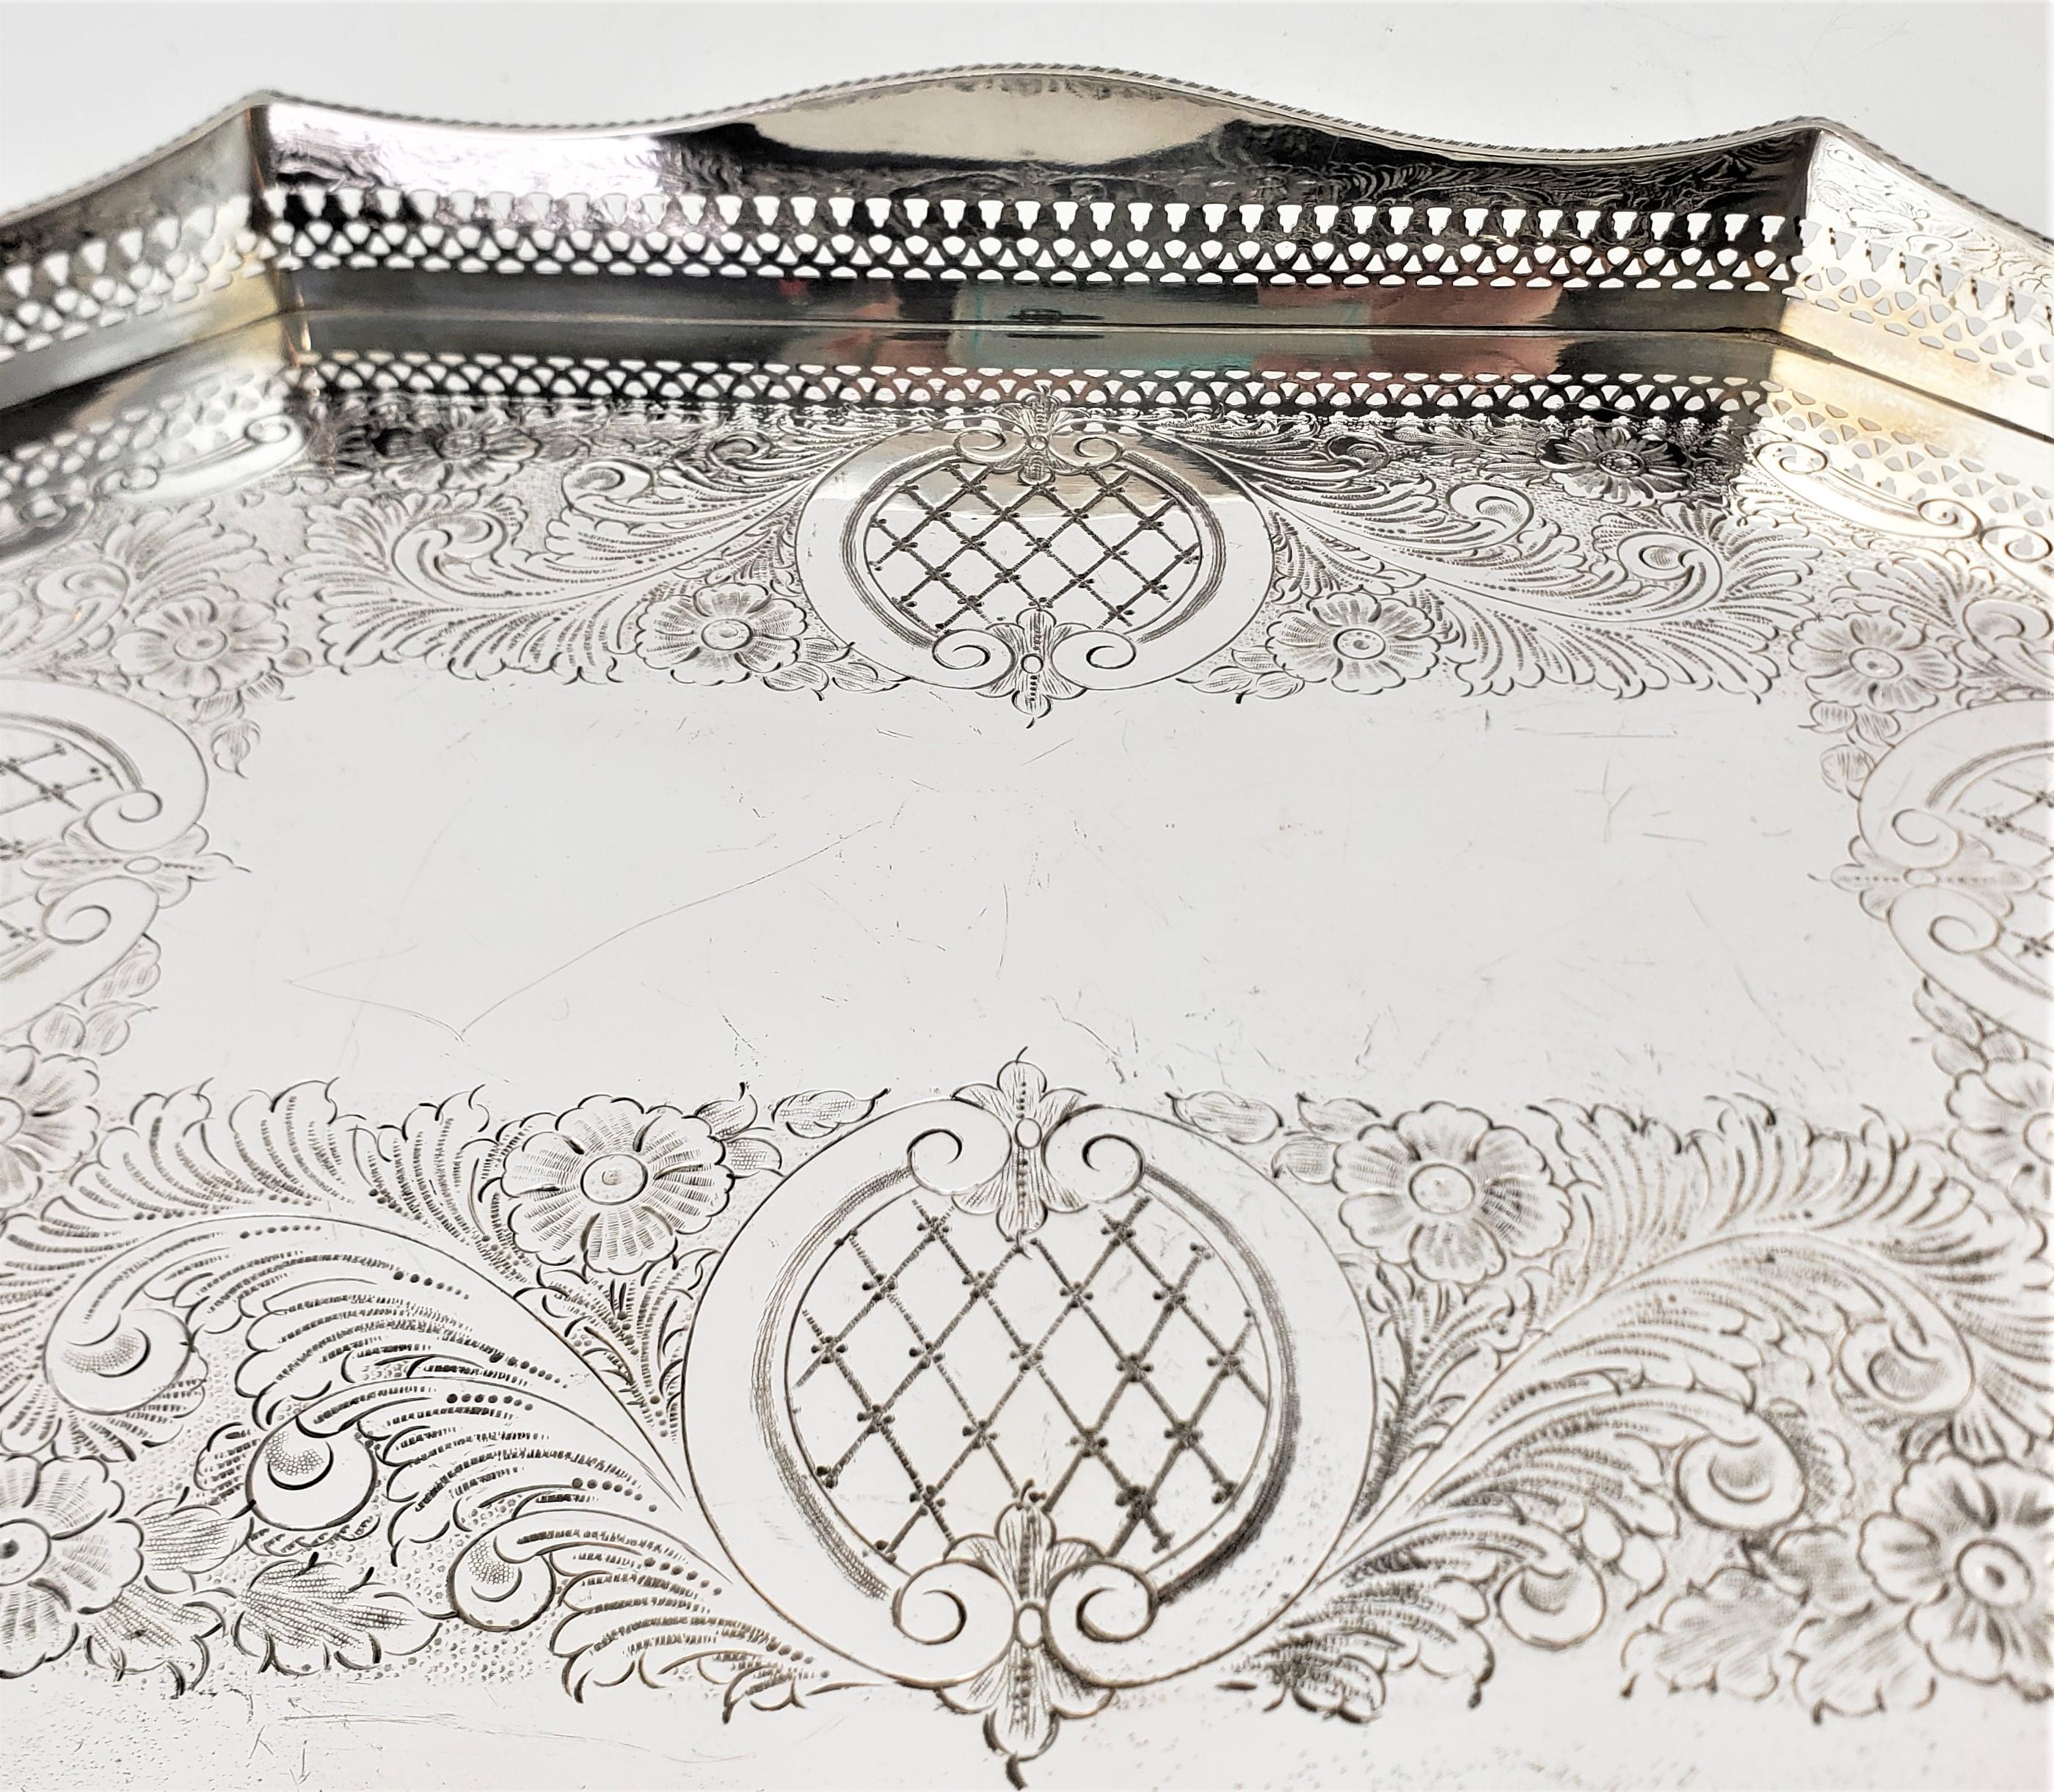 Antique English Silver Plated Footed Gallery Serving Tray with Ornate Engraving 2